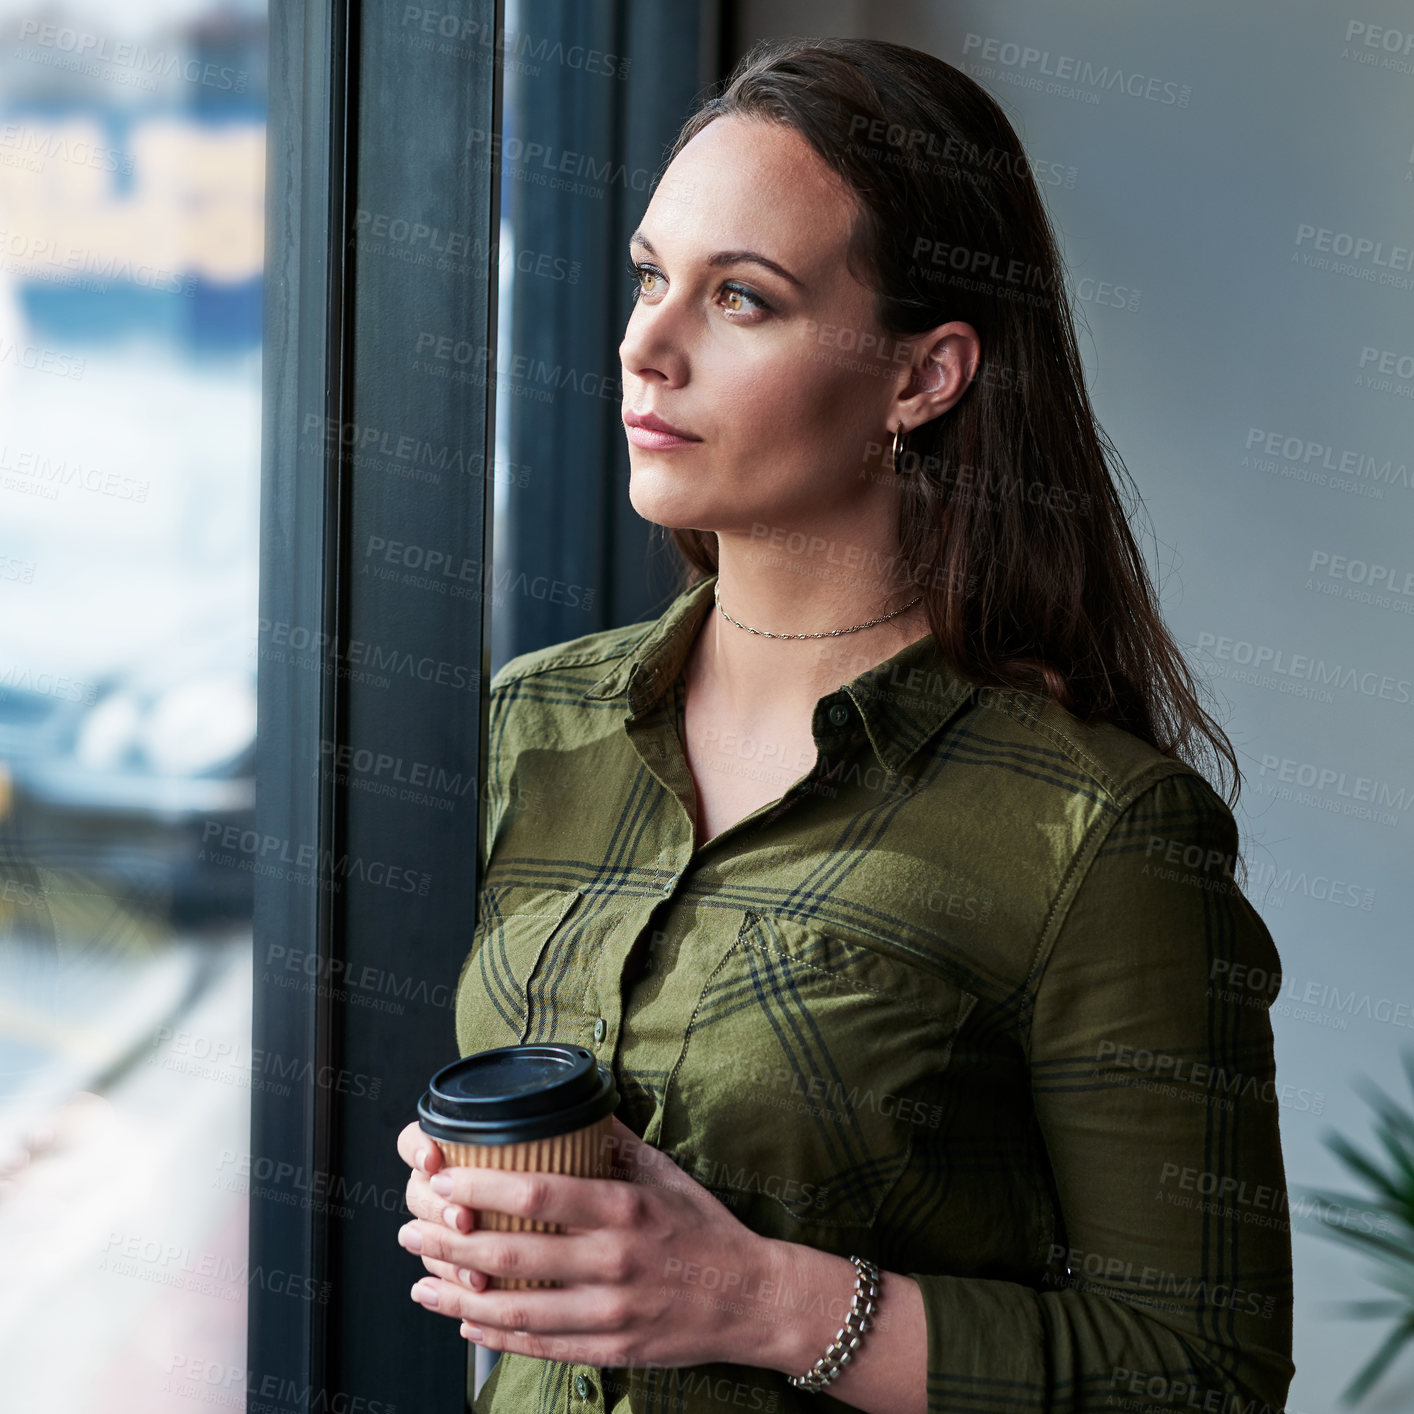 Buy stock photo Shot of an attractive young businesswoman drinking coffee and looking out the window of her office